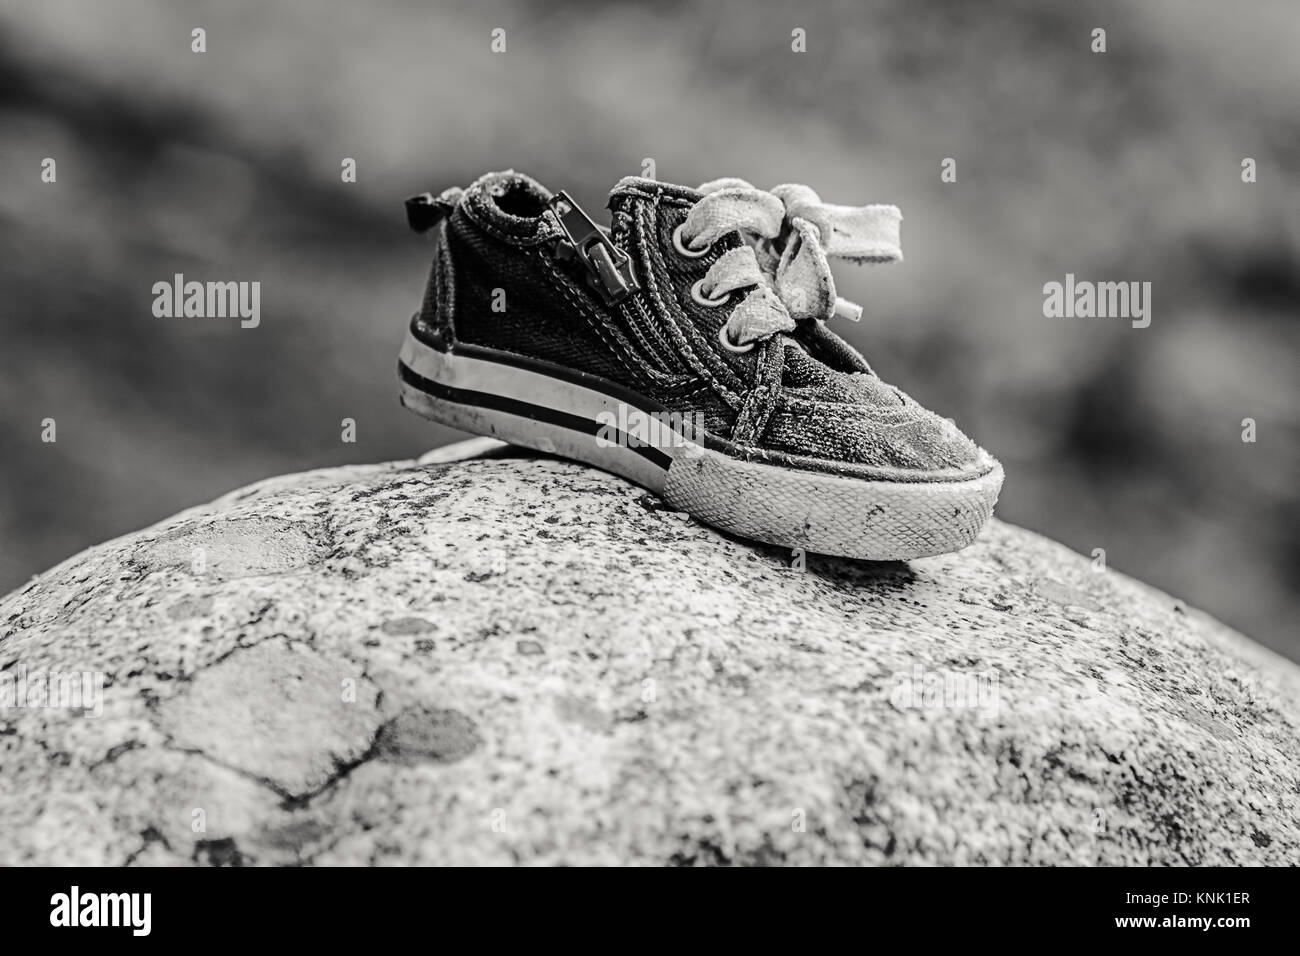 Abandoned Shoe High Resolution Stock Photography and Images - Alamy